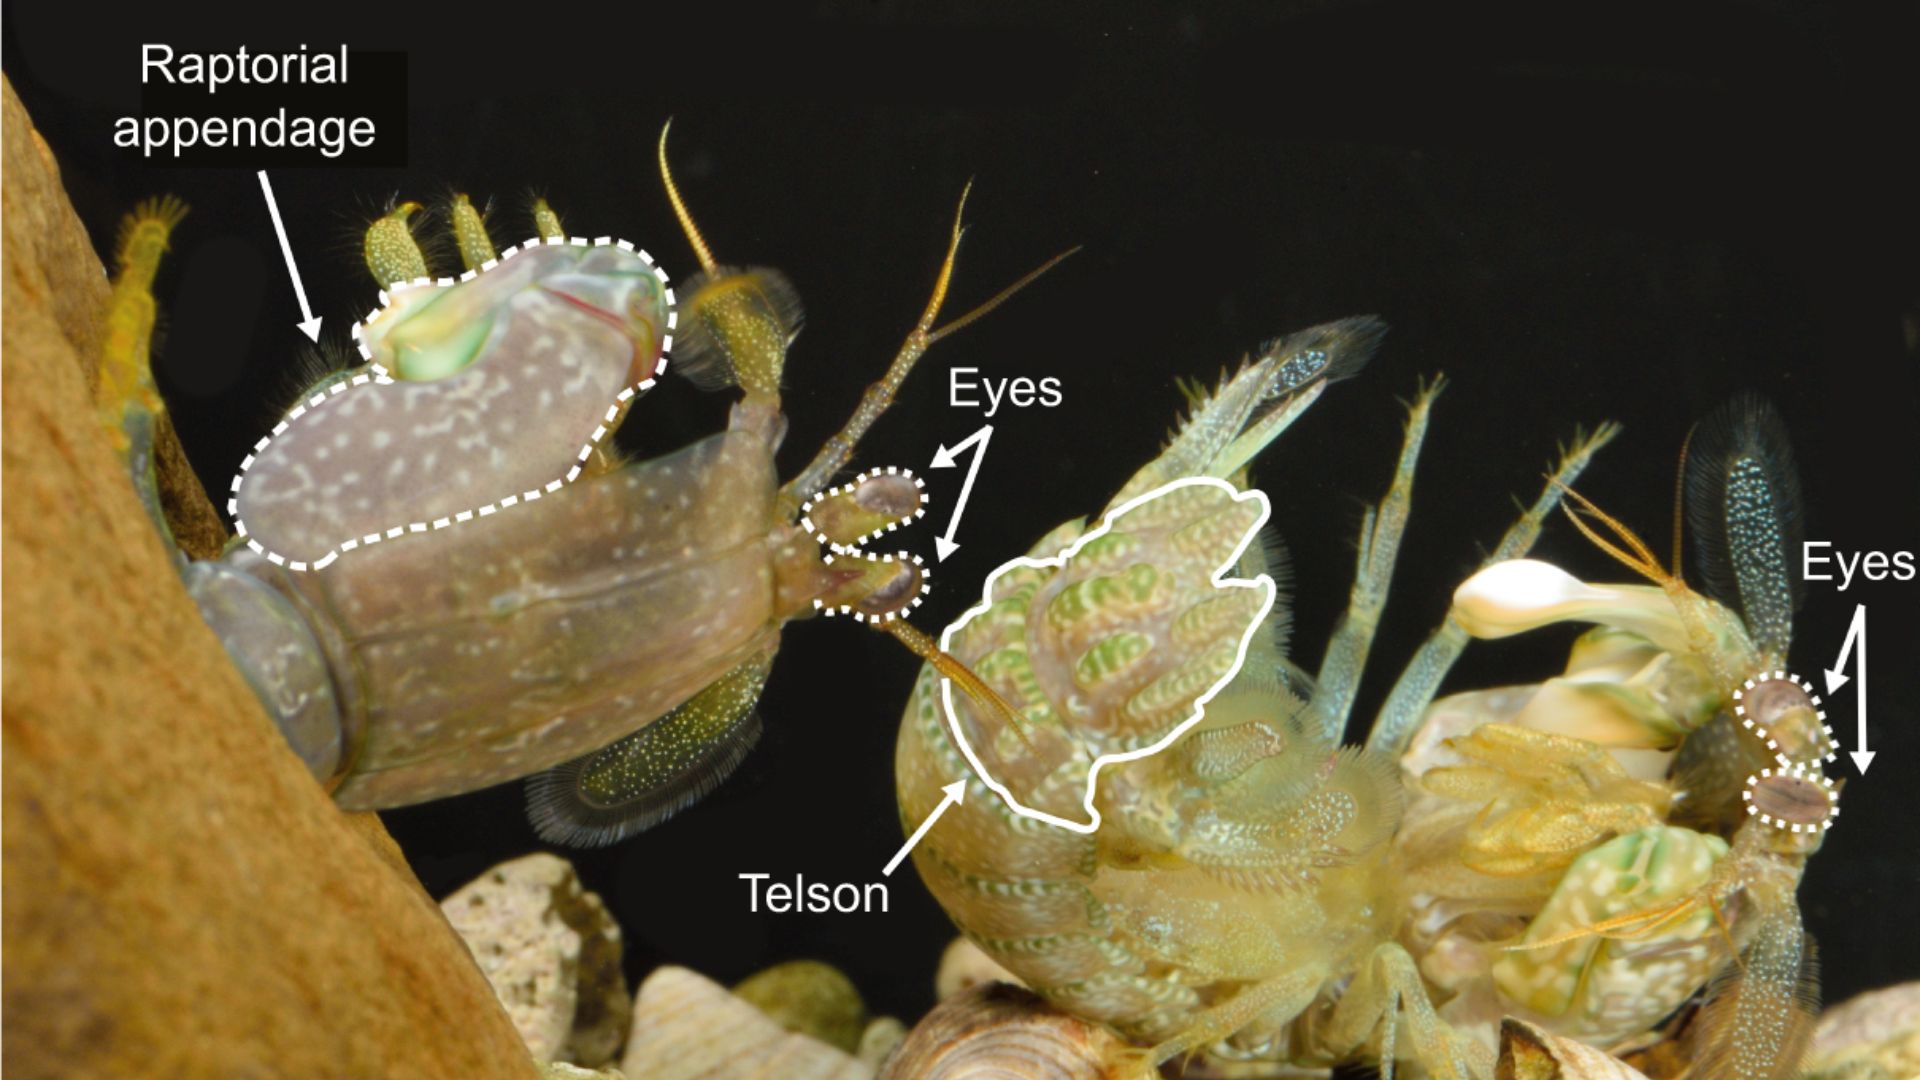 Beyond the realm of mantis shrimp, Green’s study holds profound implications for understanding how animals contend with high-impact forces. From bighorn sheep to trap-jaw ants, numerous creatures grapple with the challenges of combat. By bridging the gap between behavior and morphology, Green’s research paves the way for a deeper understanding of evolutionary defenses across the animal kingdom.